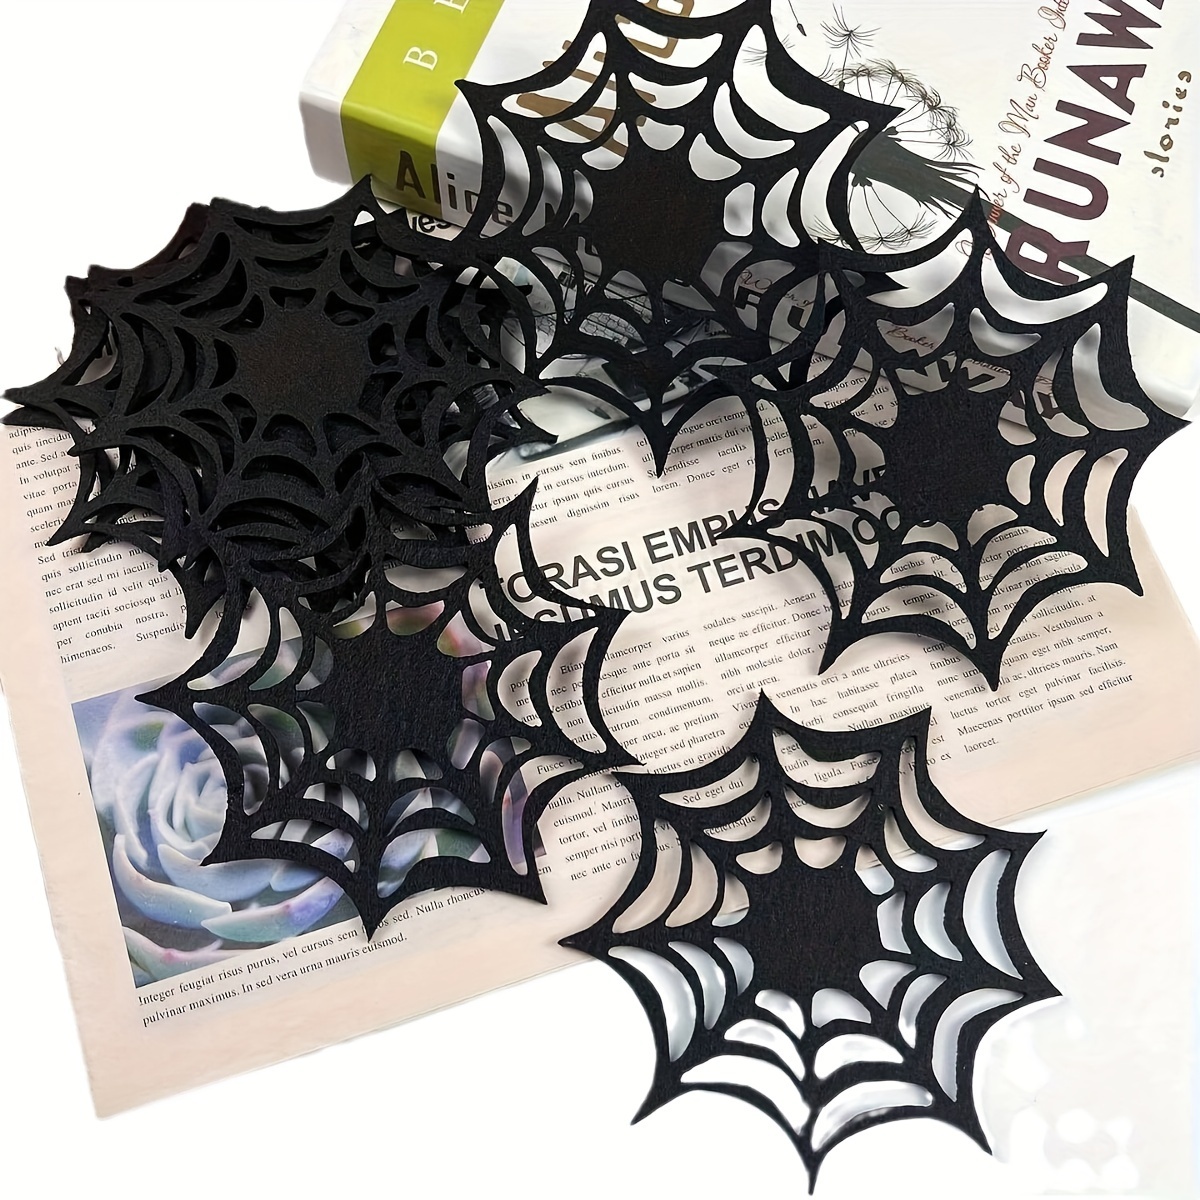 

6pcs Handcrafted Wooden Spider Web Coasters -superkheat Insulation, Stylish Drink Protectors & Durable Cup Matsperfect Halloween Home Decor, Room Accent & Drinkwareaccessories Gift Set